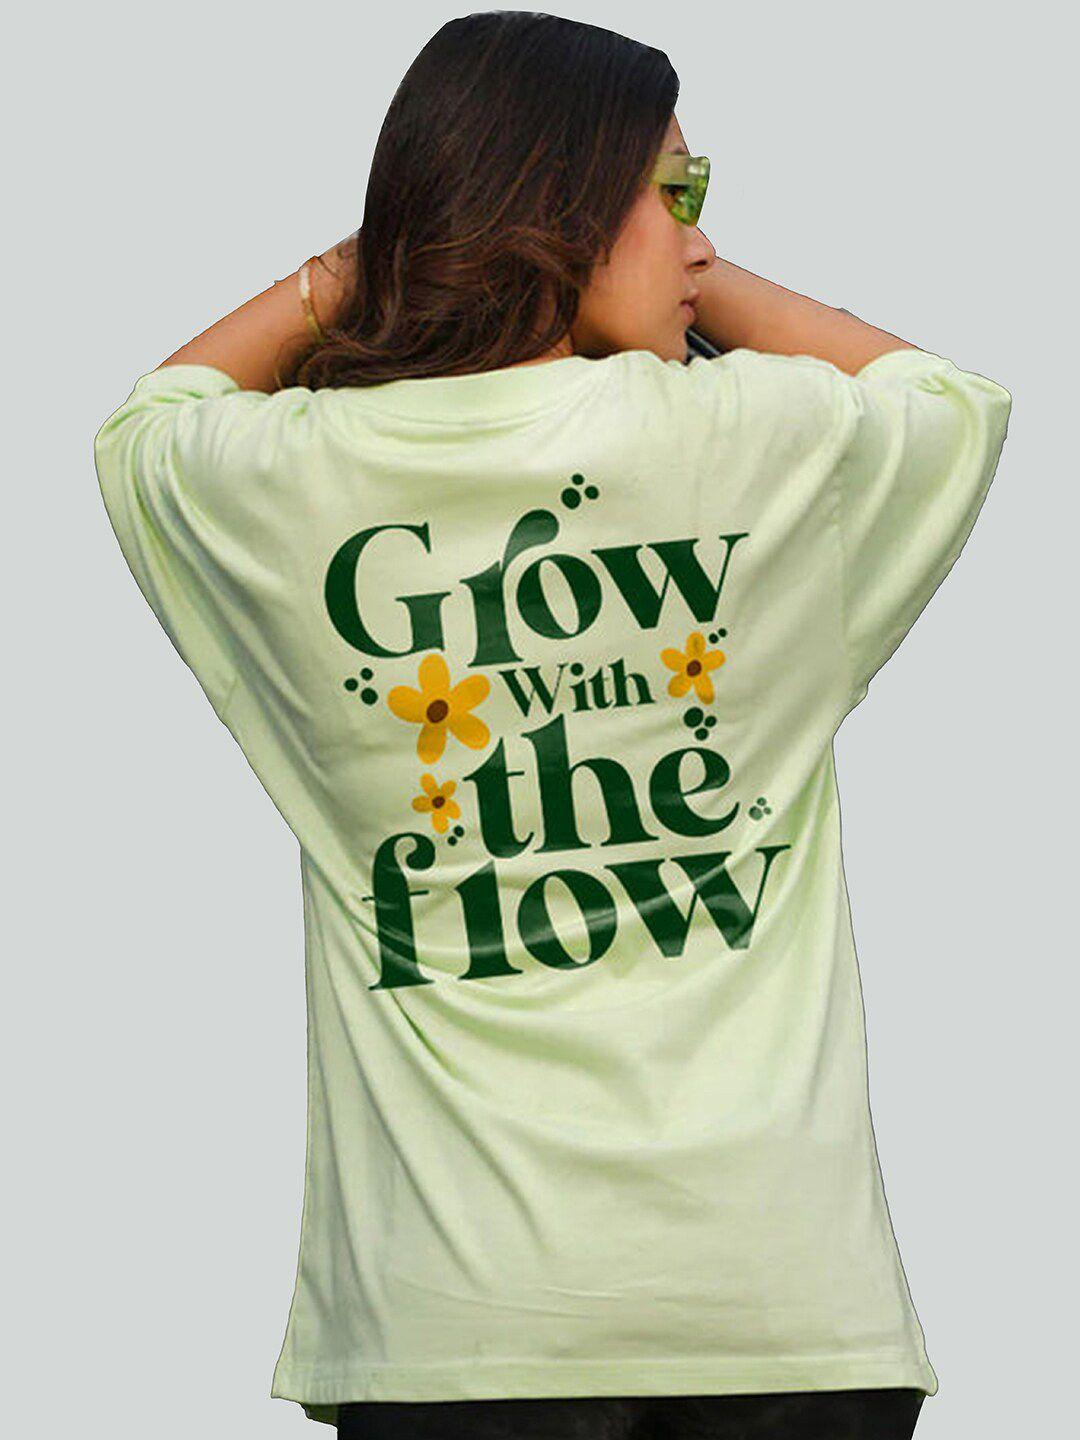 bloopers store women green typography printed extended sleeves t-shirt